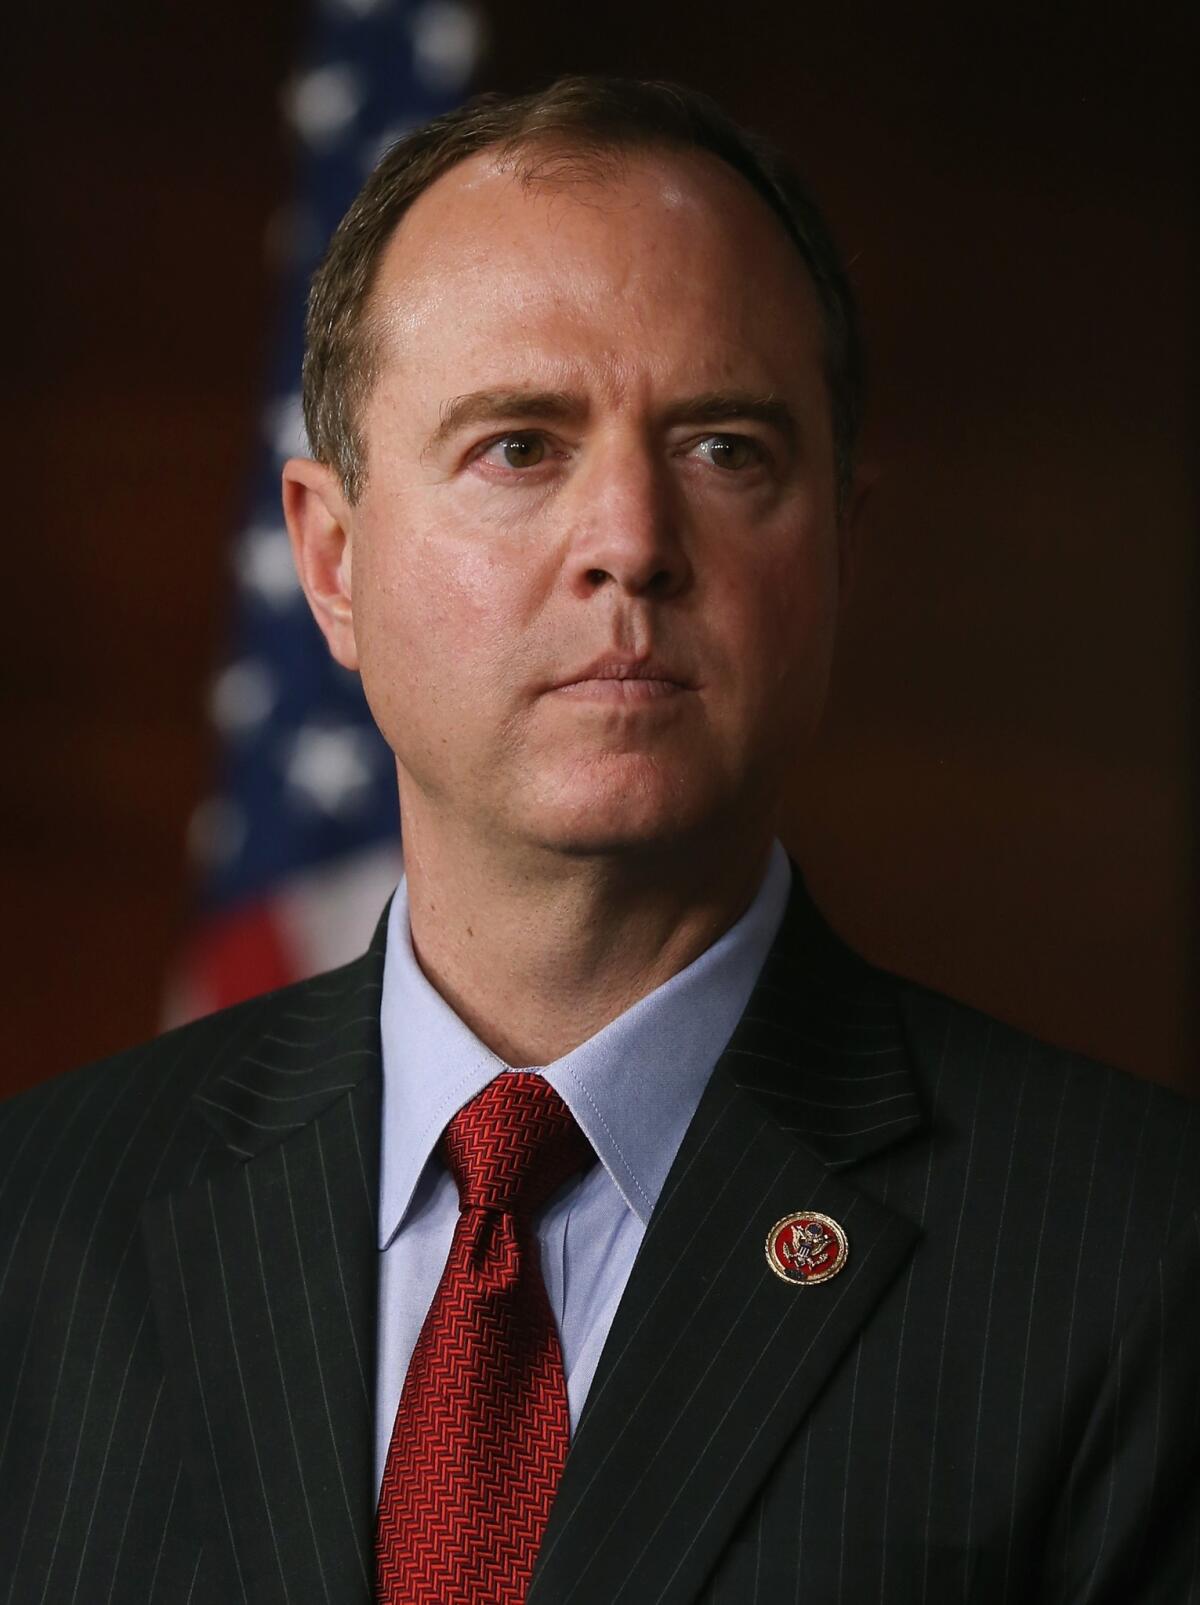 Rep. Adam B. Schiff (D-CA) during a news conference on Capitol Hill, May 21, 2014 in Washington, DC.